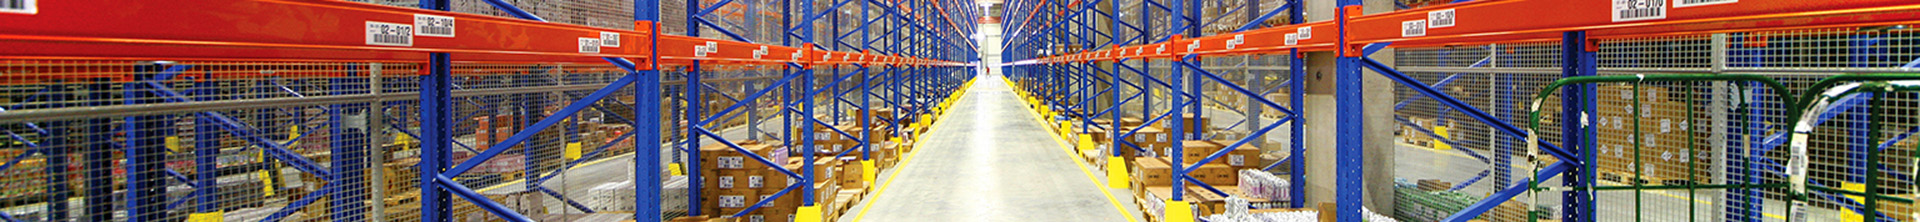 Tennant Floor Cleaning Solutions for the Warehousing and Logistics Industry